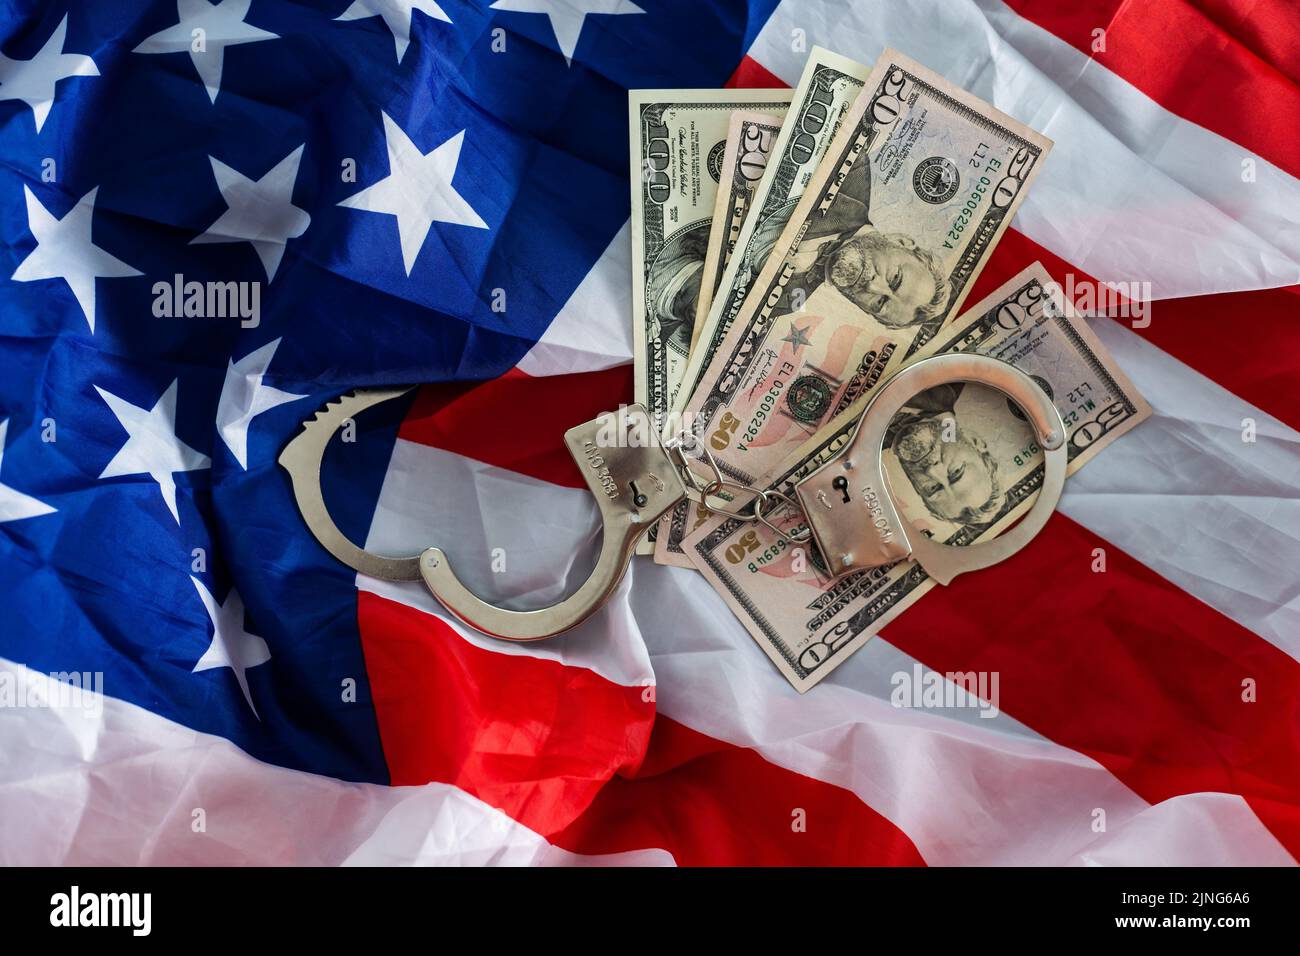 metal handcuff, american dollars cash over flag of USA. Illegal concept. Bribing and corruption Stock Photo